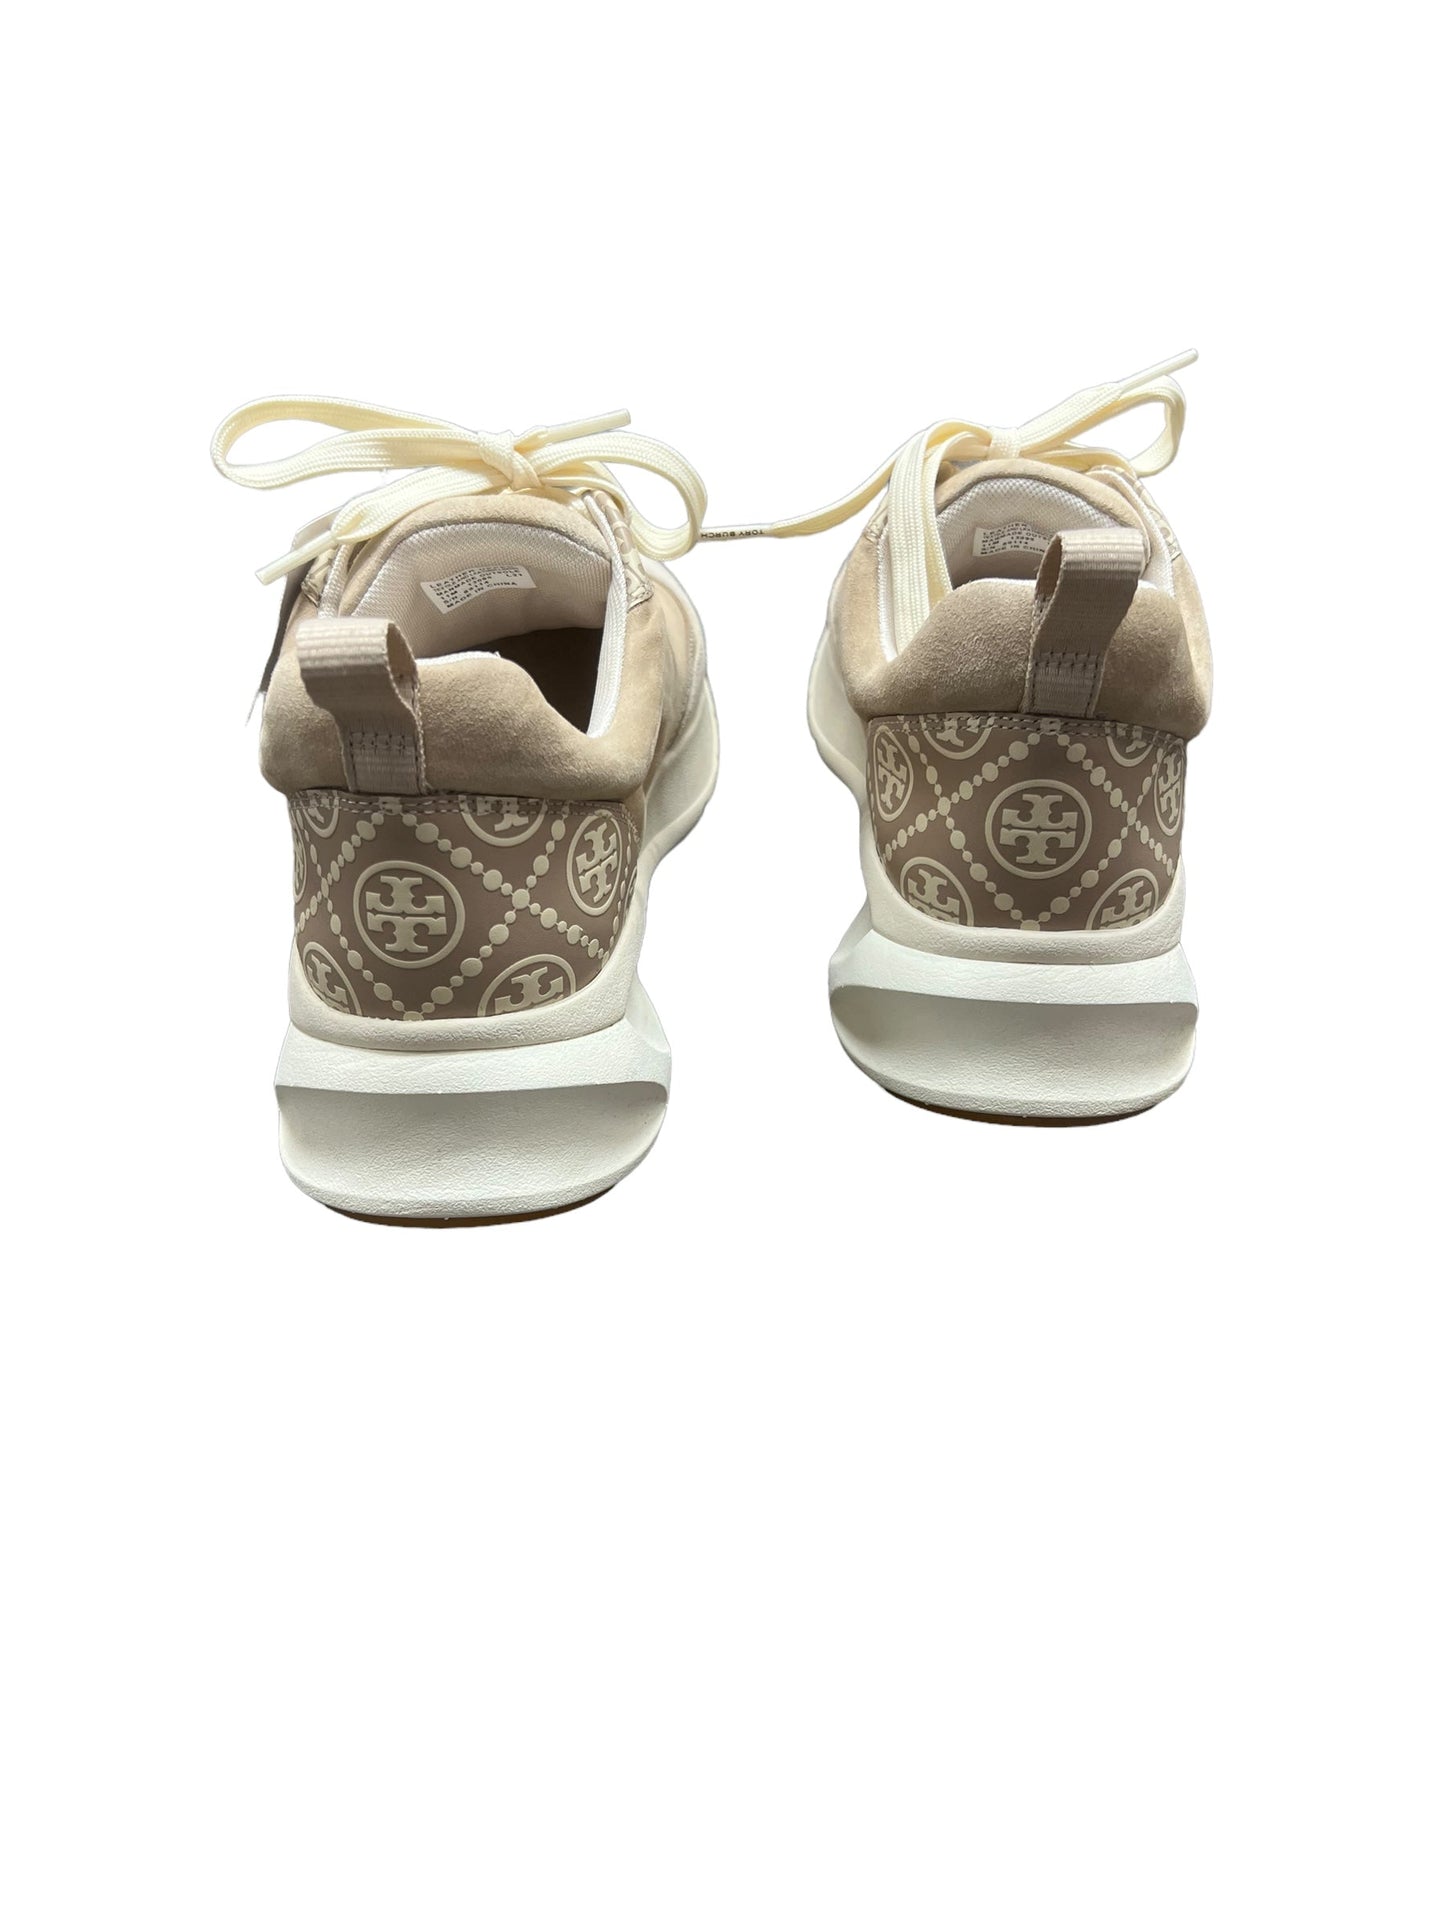 Shoes Sneakers By Tory Burch  Size: 11